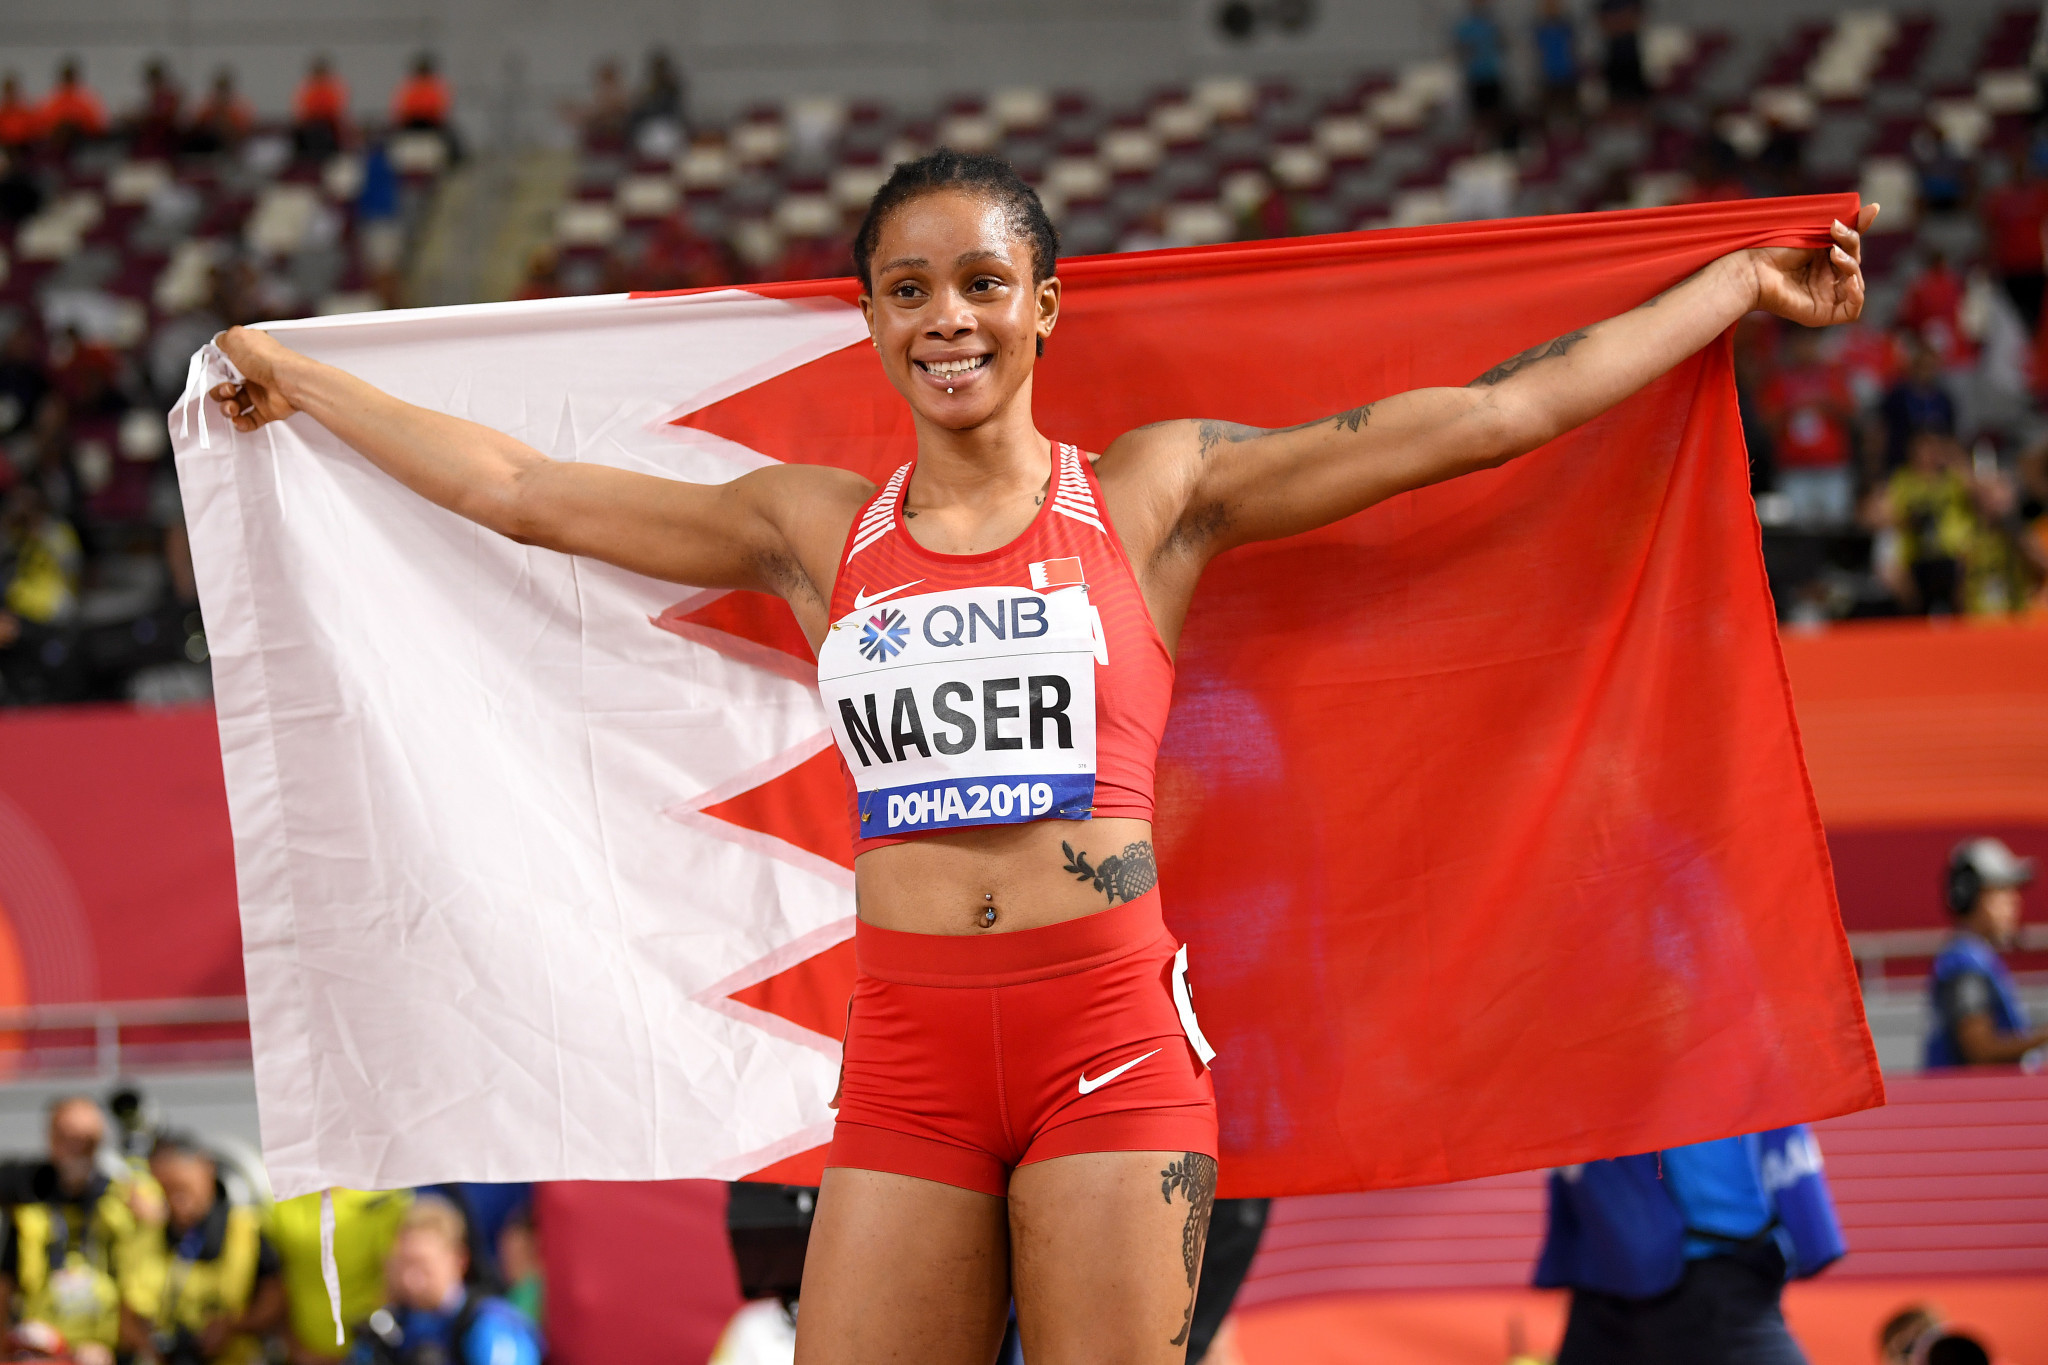 World 400m champion Naser set for two-day CAS hearing in whereabouts case